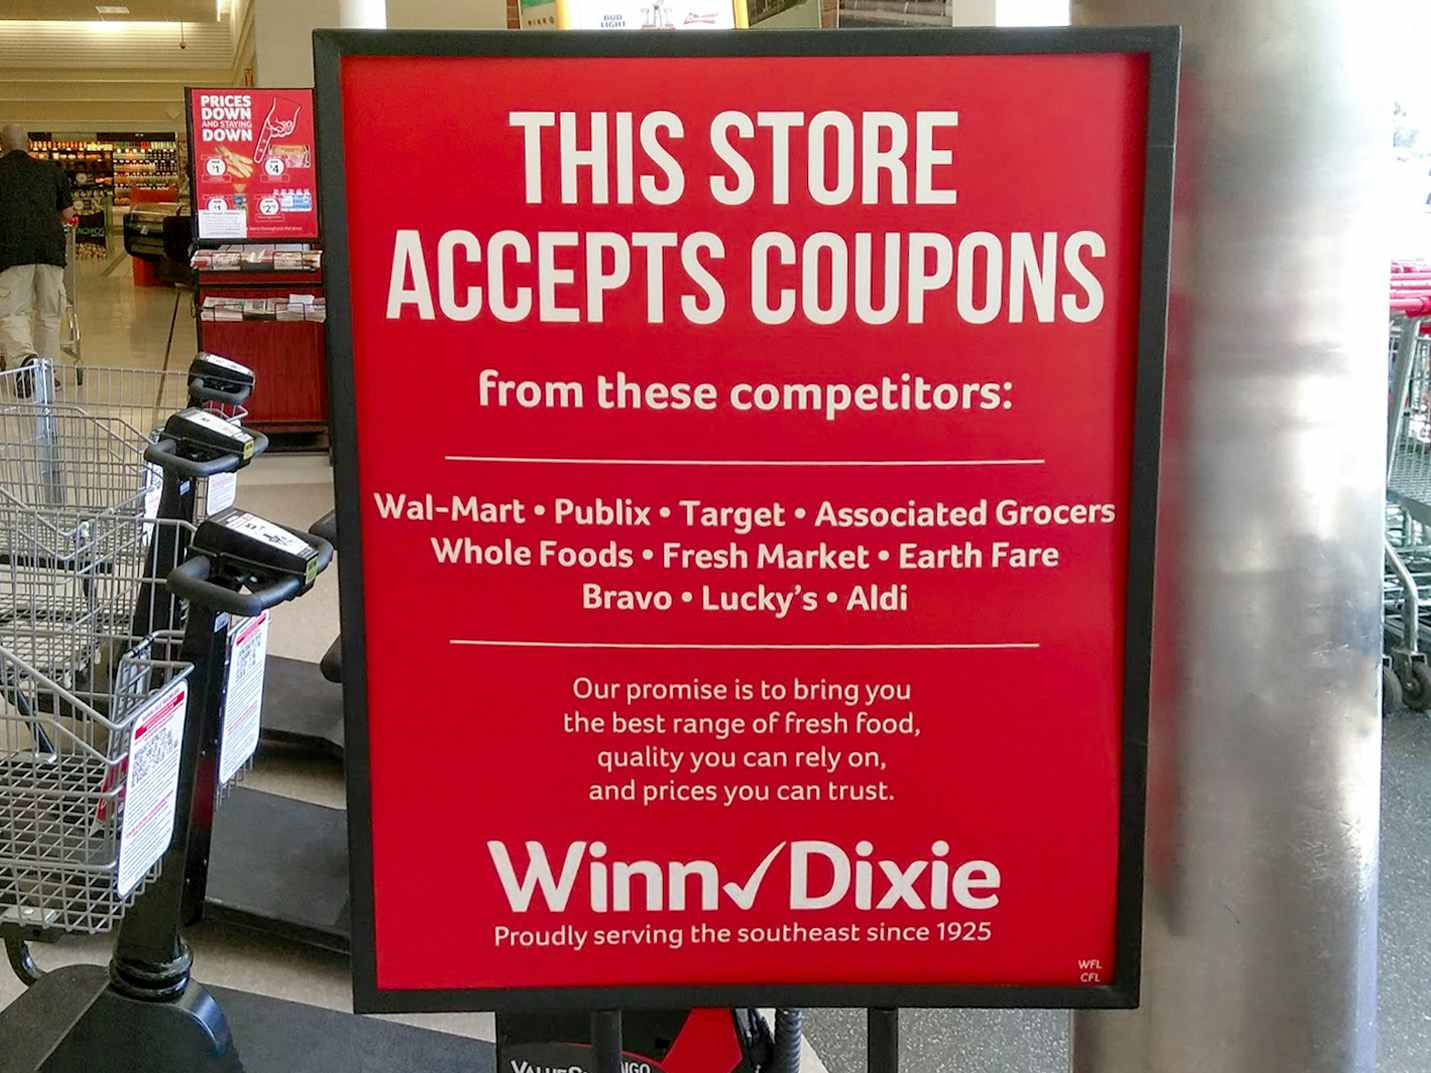 A sign inside Winn-Dixie listing the stores from which Winn-Dixie will accept competitor coupons.